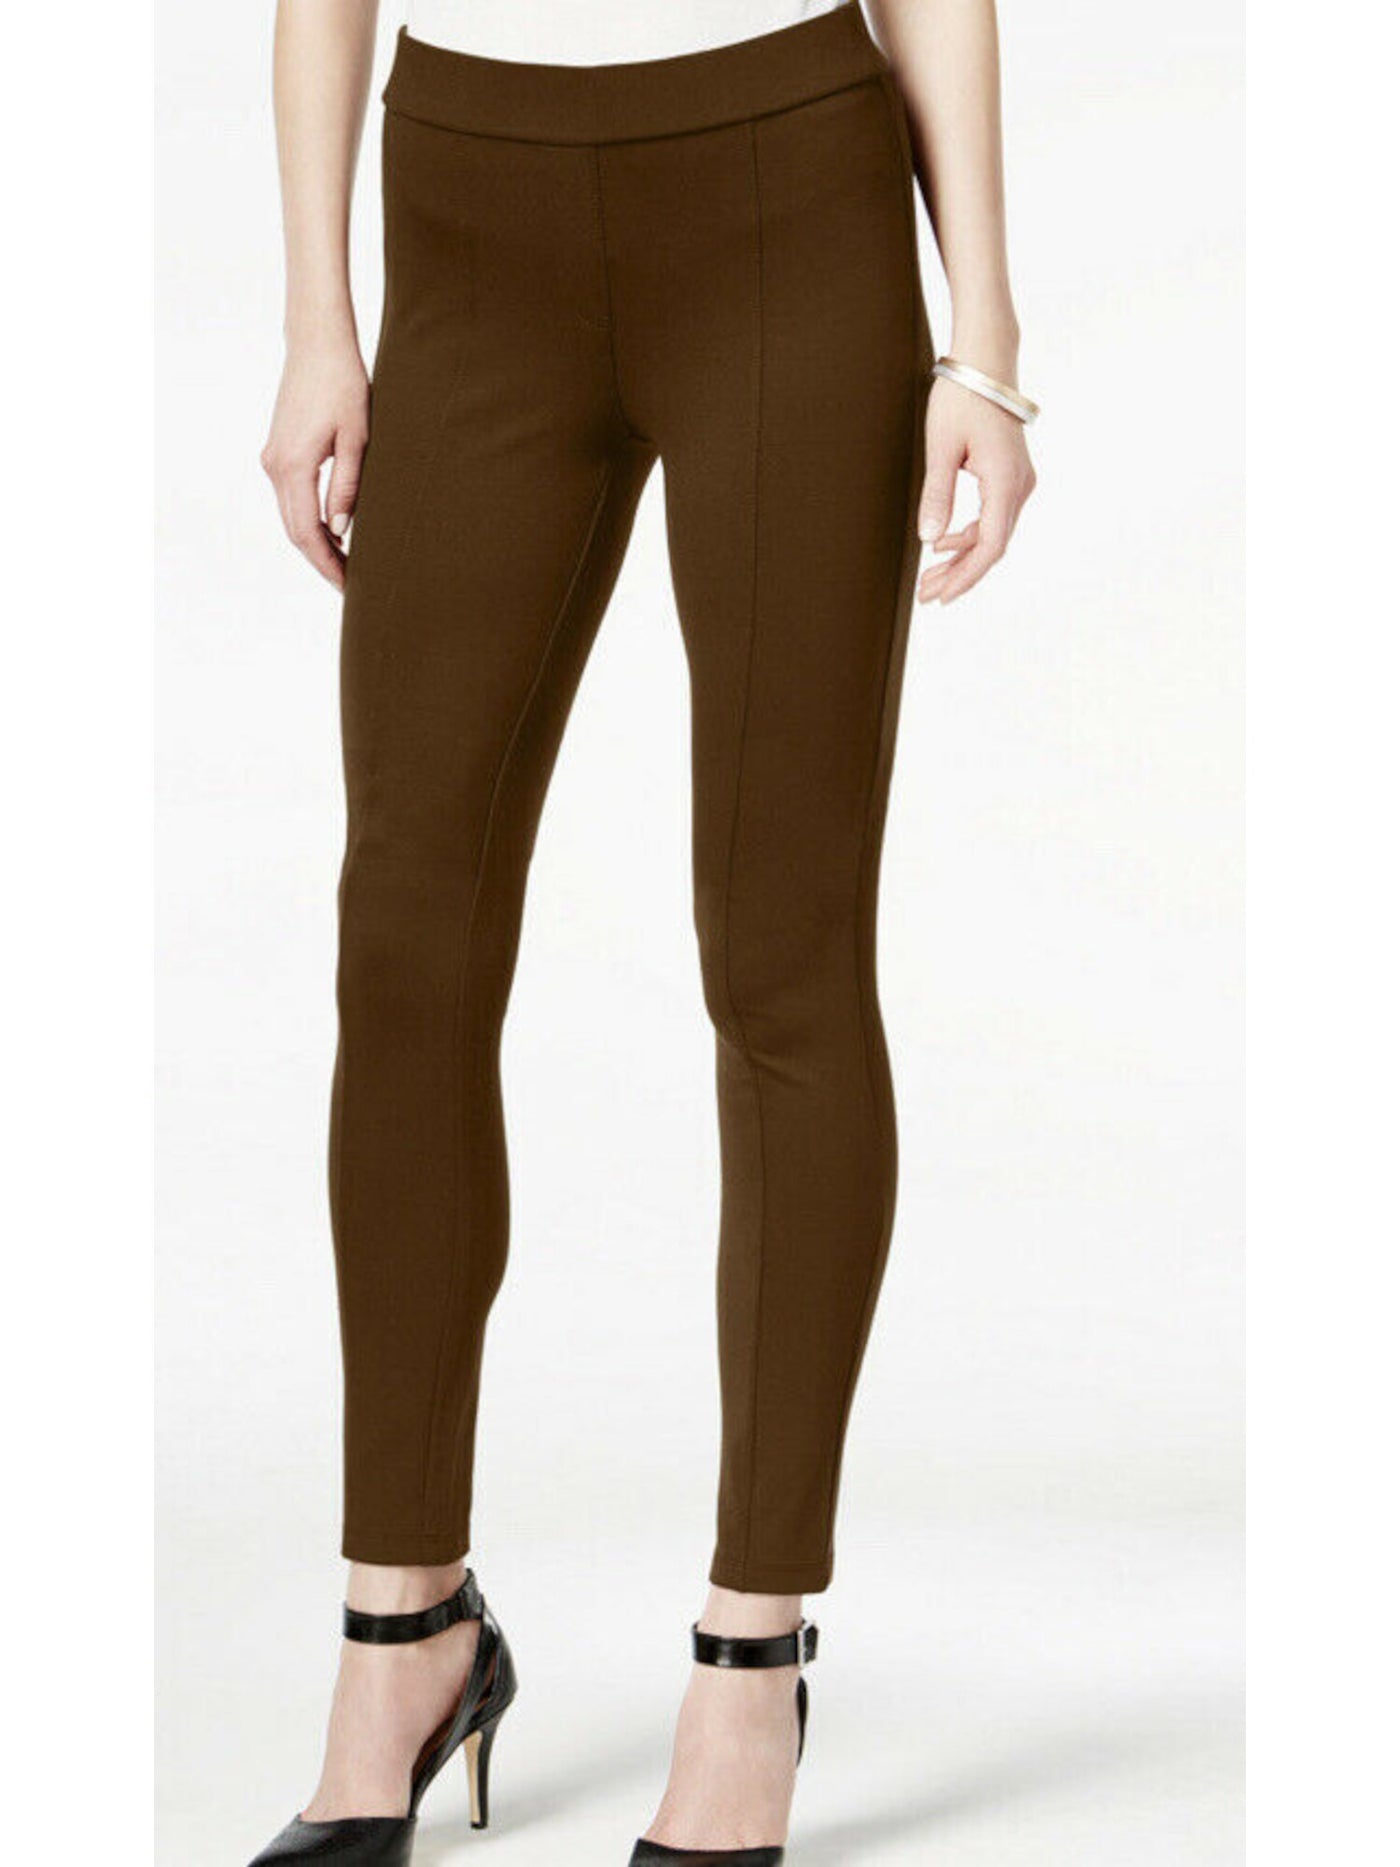 STYLE & COMPANY Womens Brown Stretch Pull-on Mid Rise Seamed Evening Skinny Leggings M